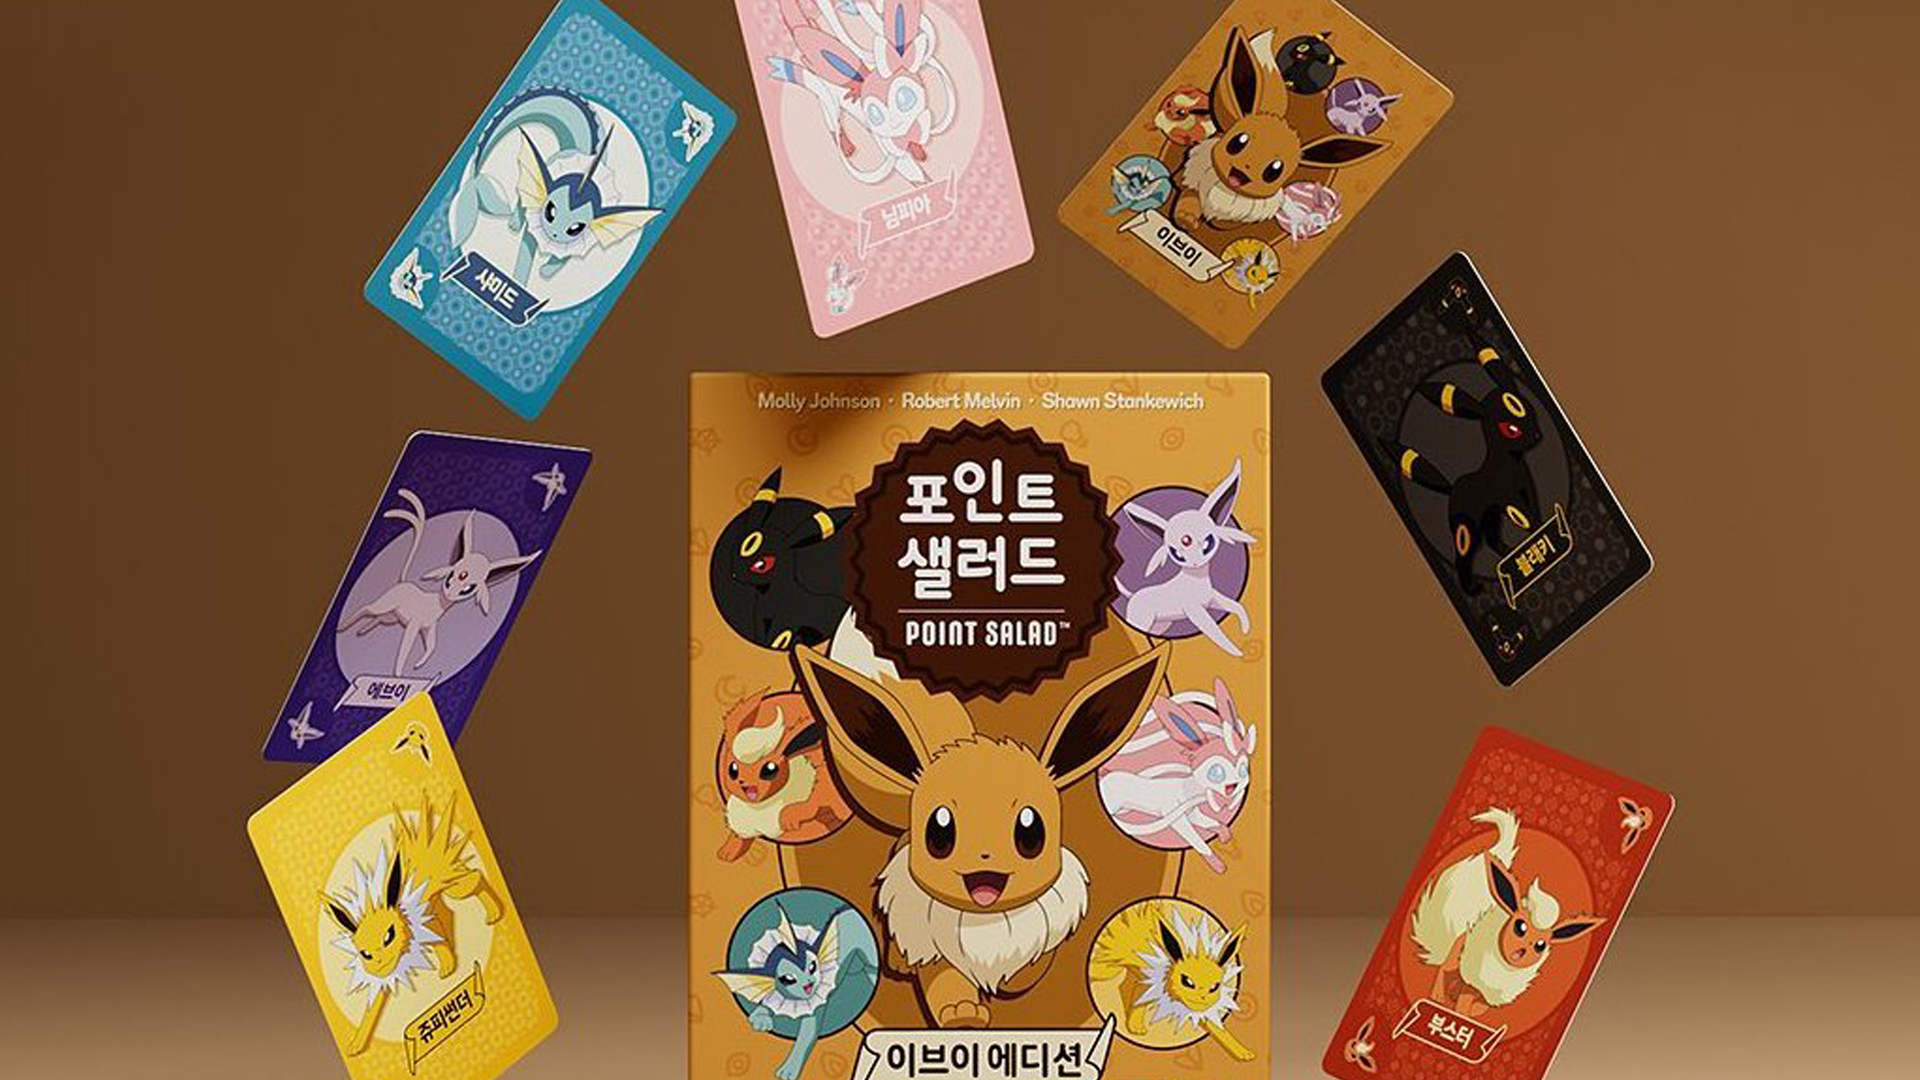 A promotional image for Point Salad: Eevee Edition, the box and cards are on display.